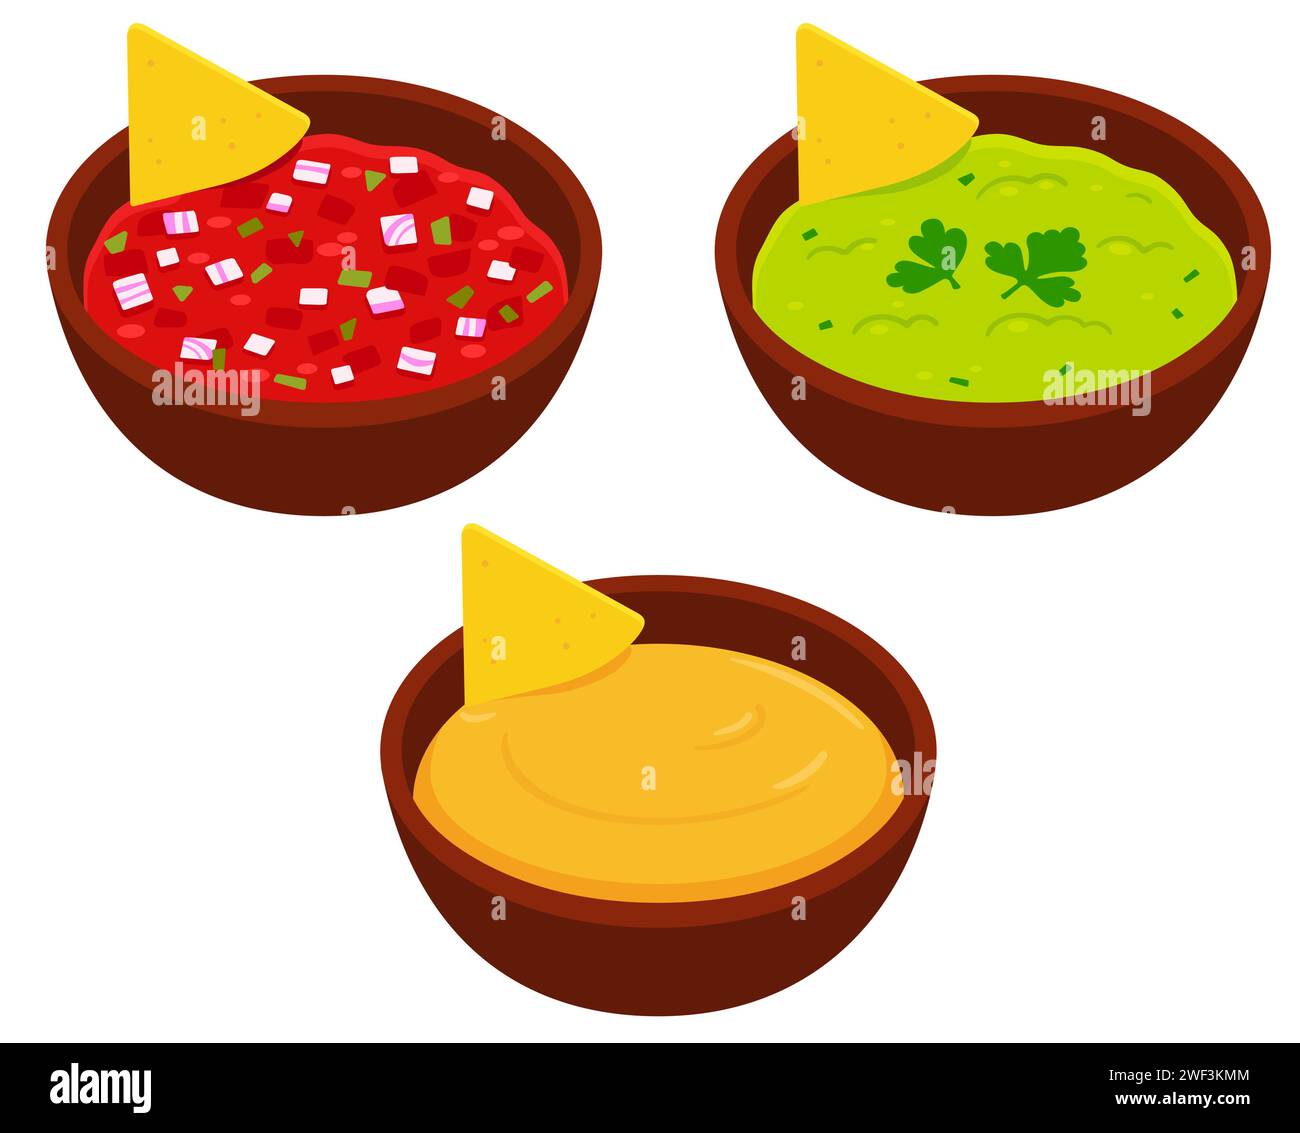 Mexican nachos and dip bowls cartoon drawing set. Tomato salsa, guacamole and cheese sauce. Isolated vector clip art illustration. Stock Vector